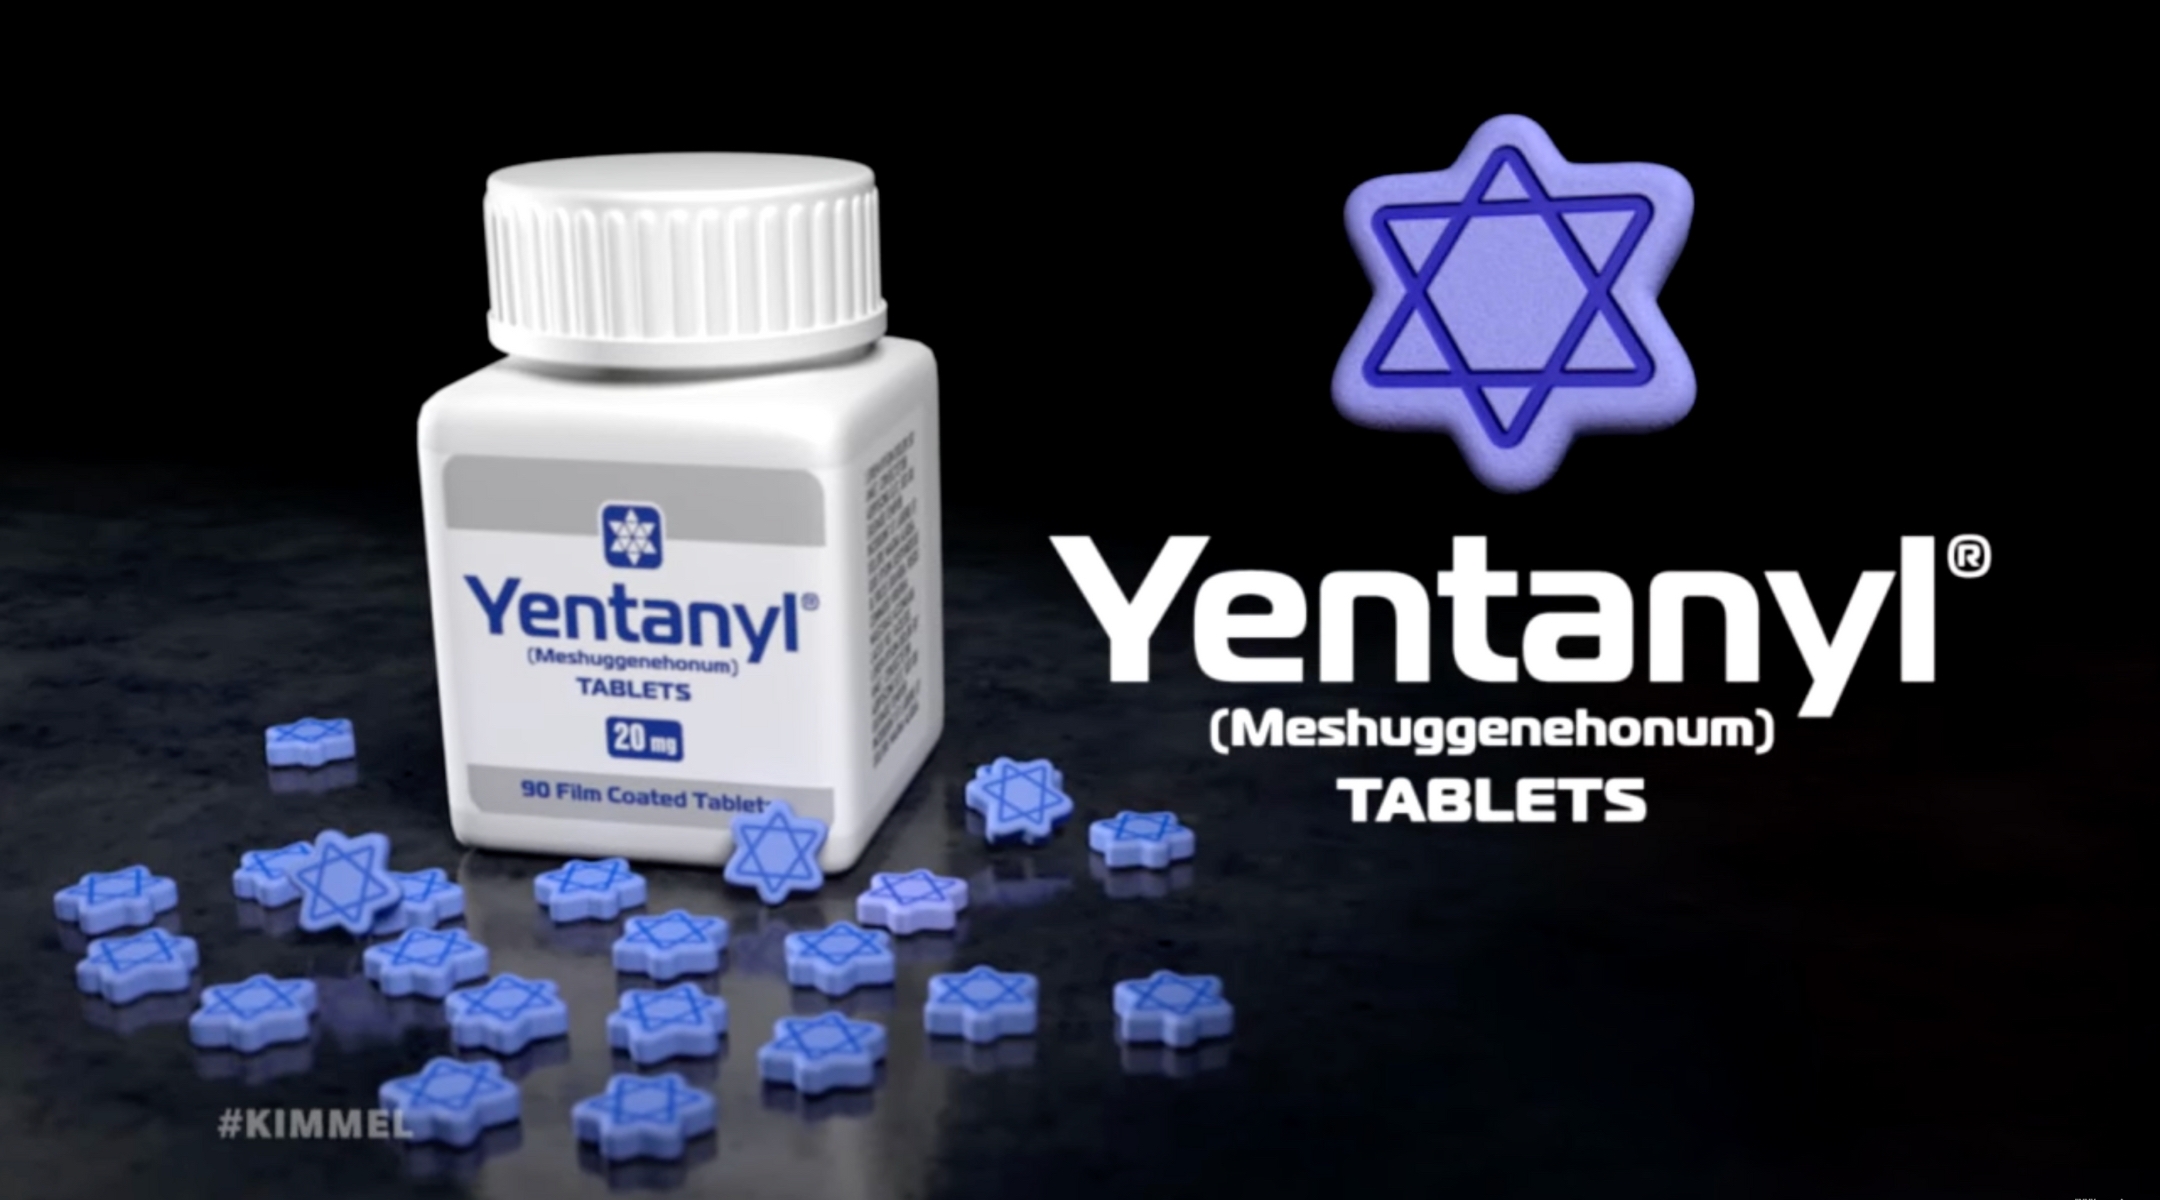 Jimmy Kimmel sketch pokes fun at Kanye West and antisemitism with ad for ‘Yentanyl’